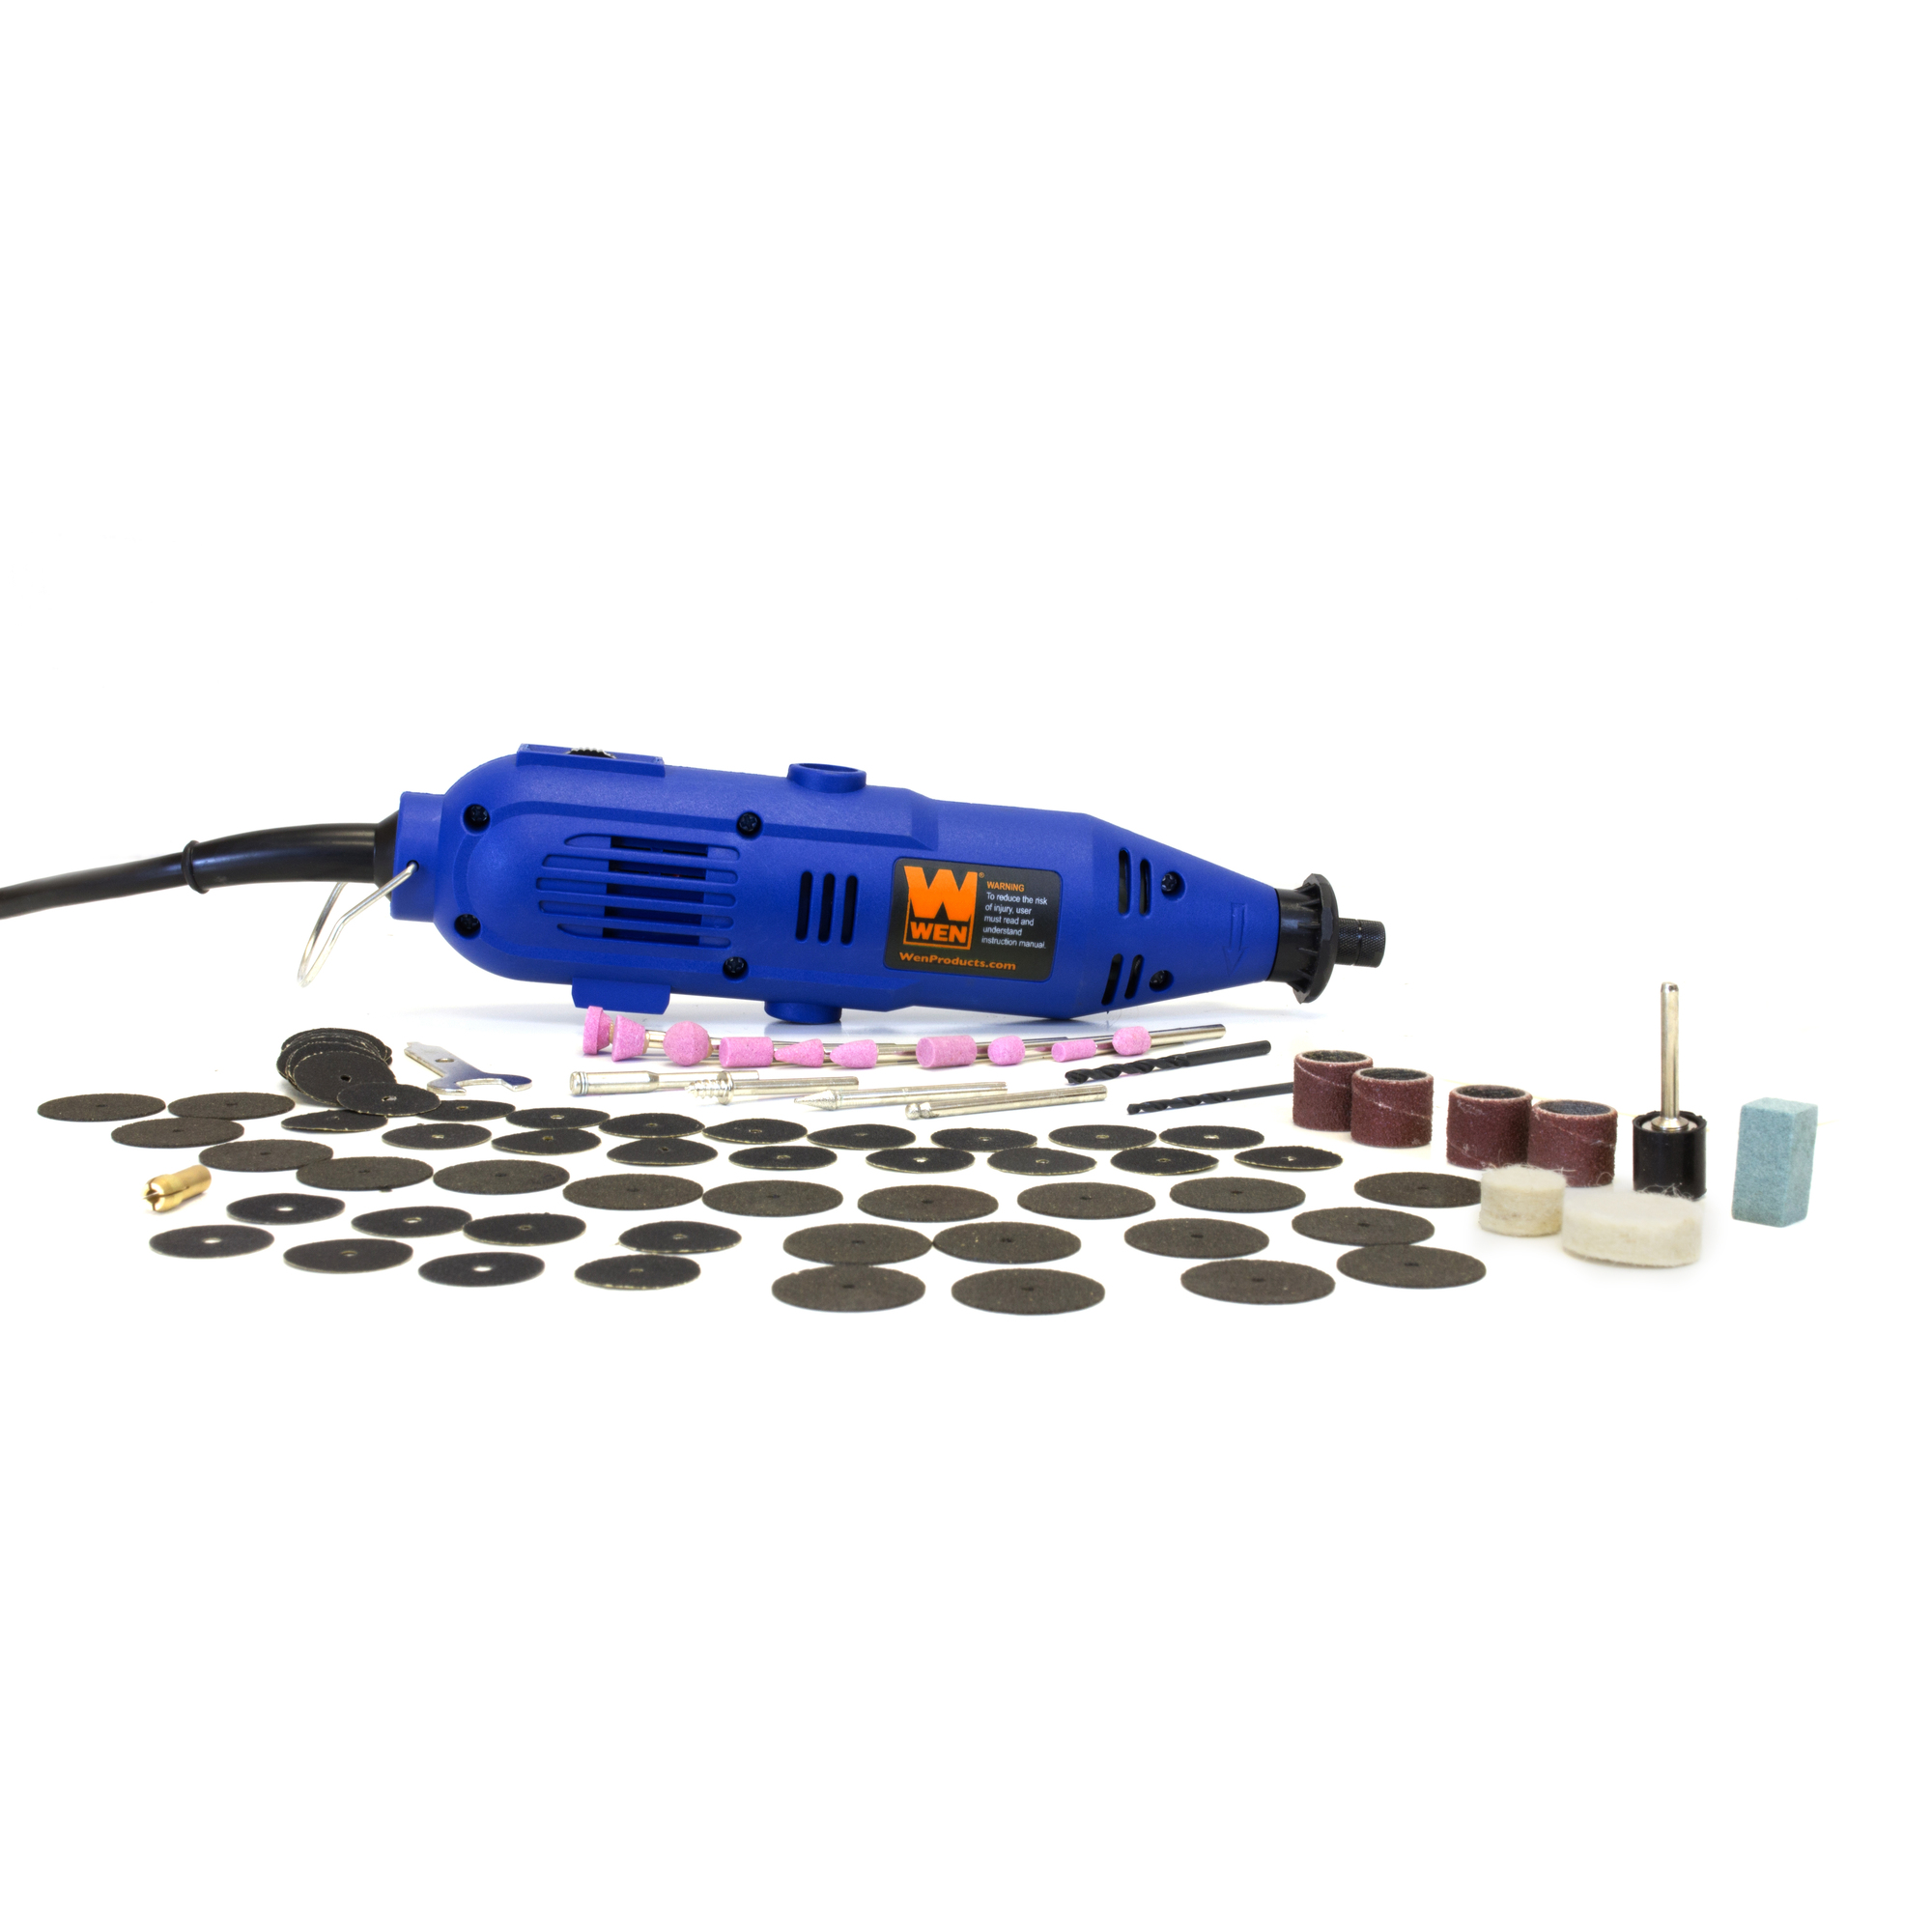 WEN, 101-Piece Rotary Tool Kit, Max. Speed 30000 rpm, Amps 1 Model 2307